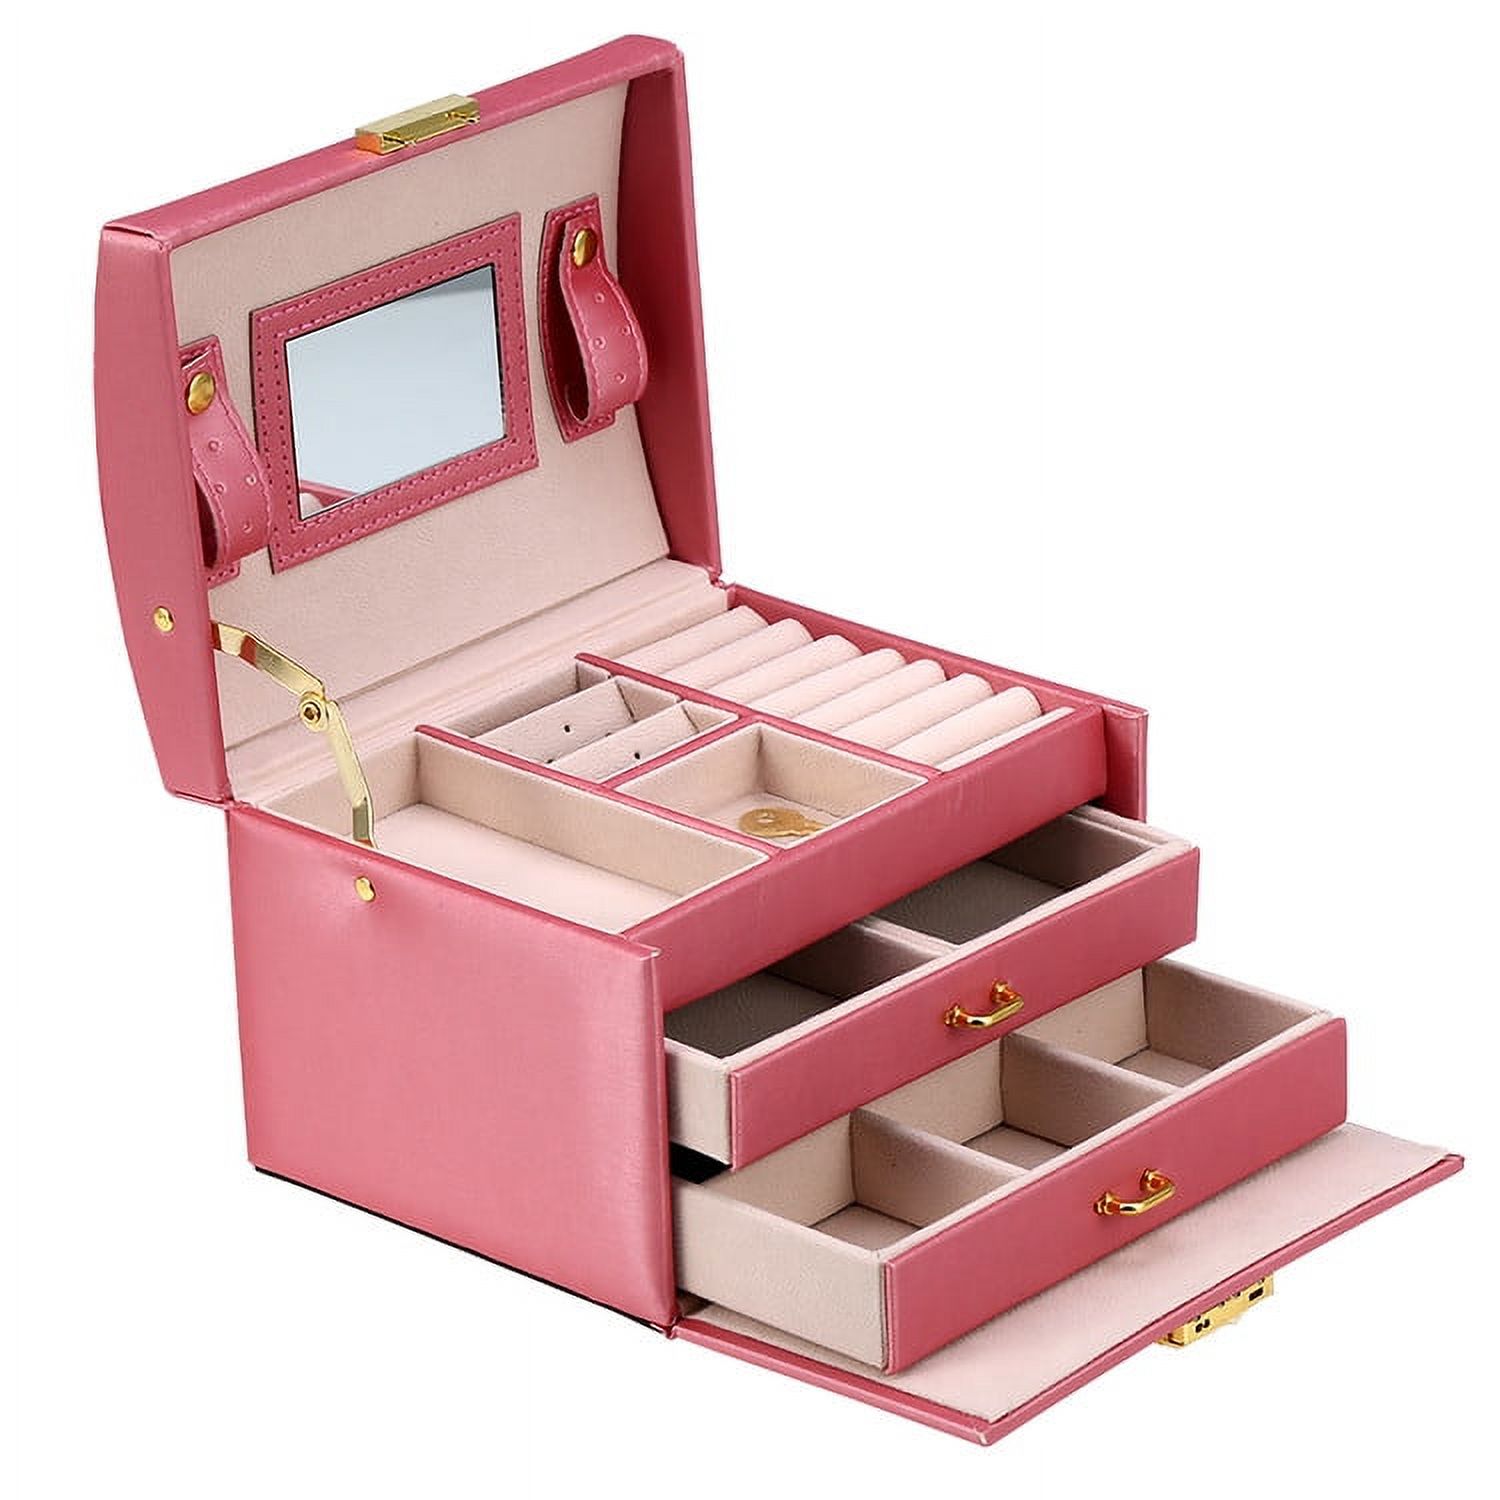 Walfront 3-Layer Girls Leather Jewelry Box and Watch Organizers, Lockable, Mirror, Pink - image 1 of 4